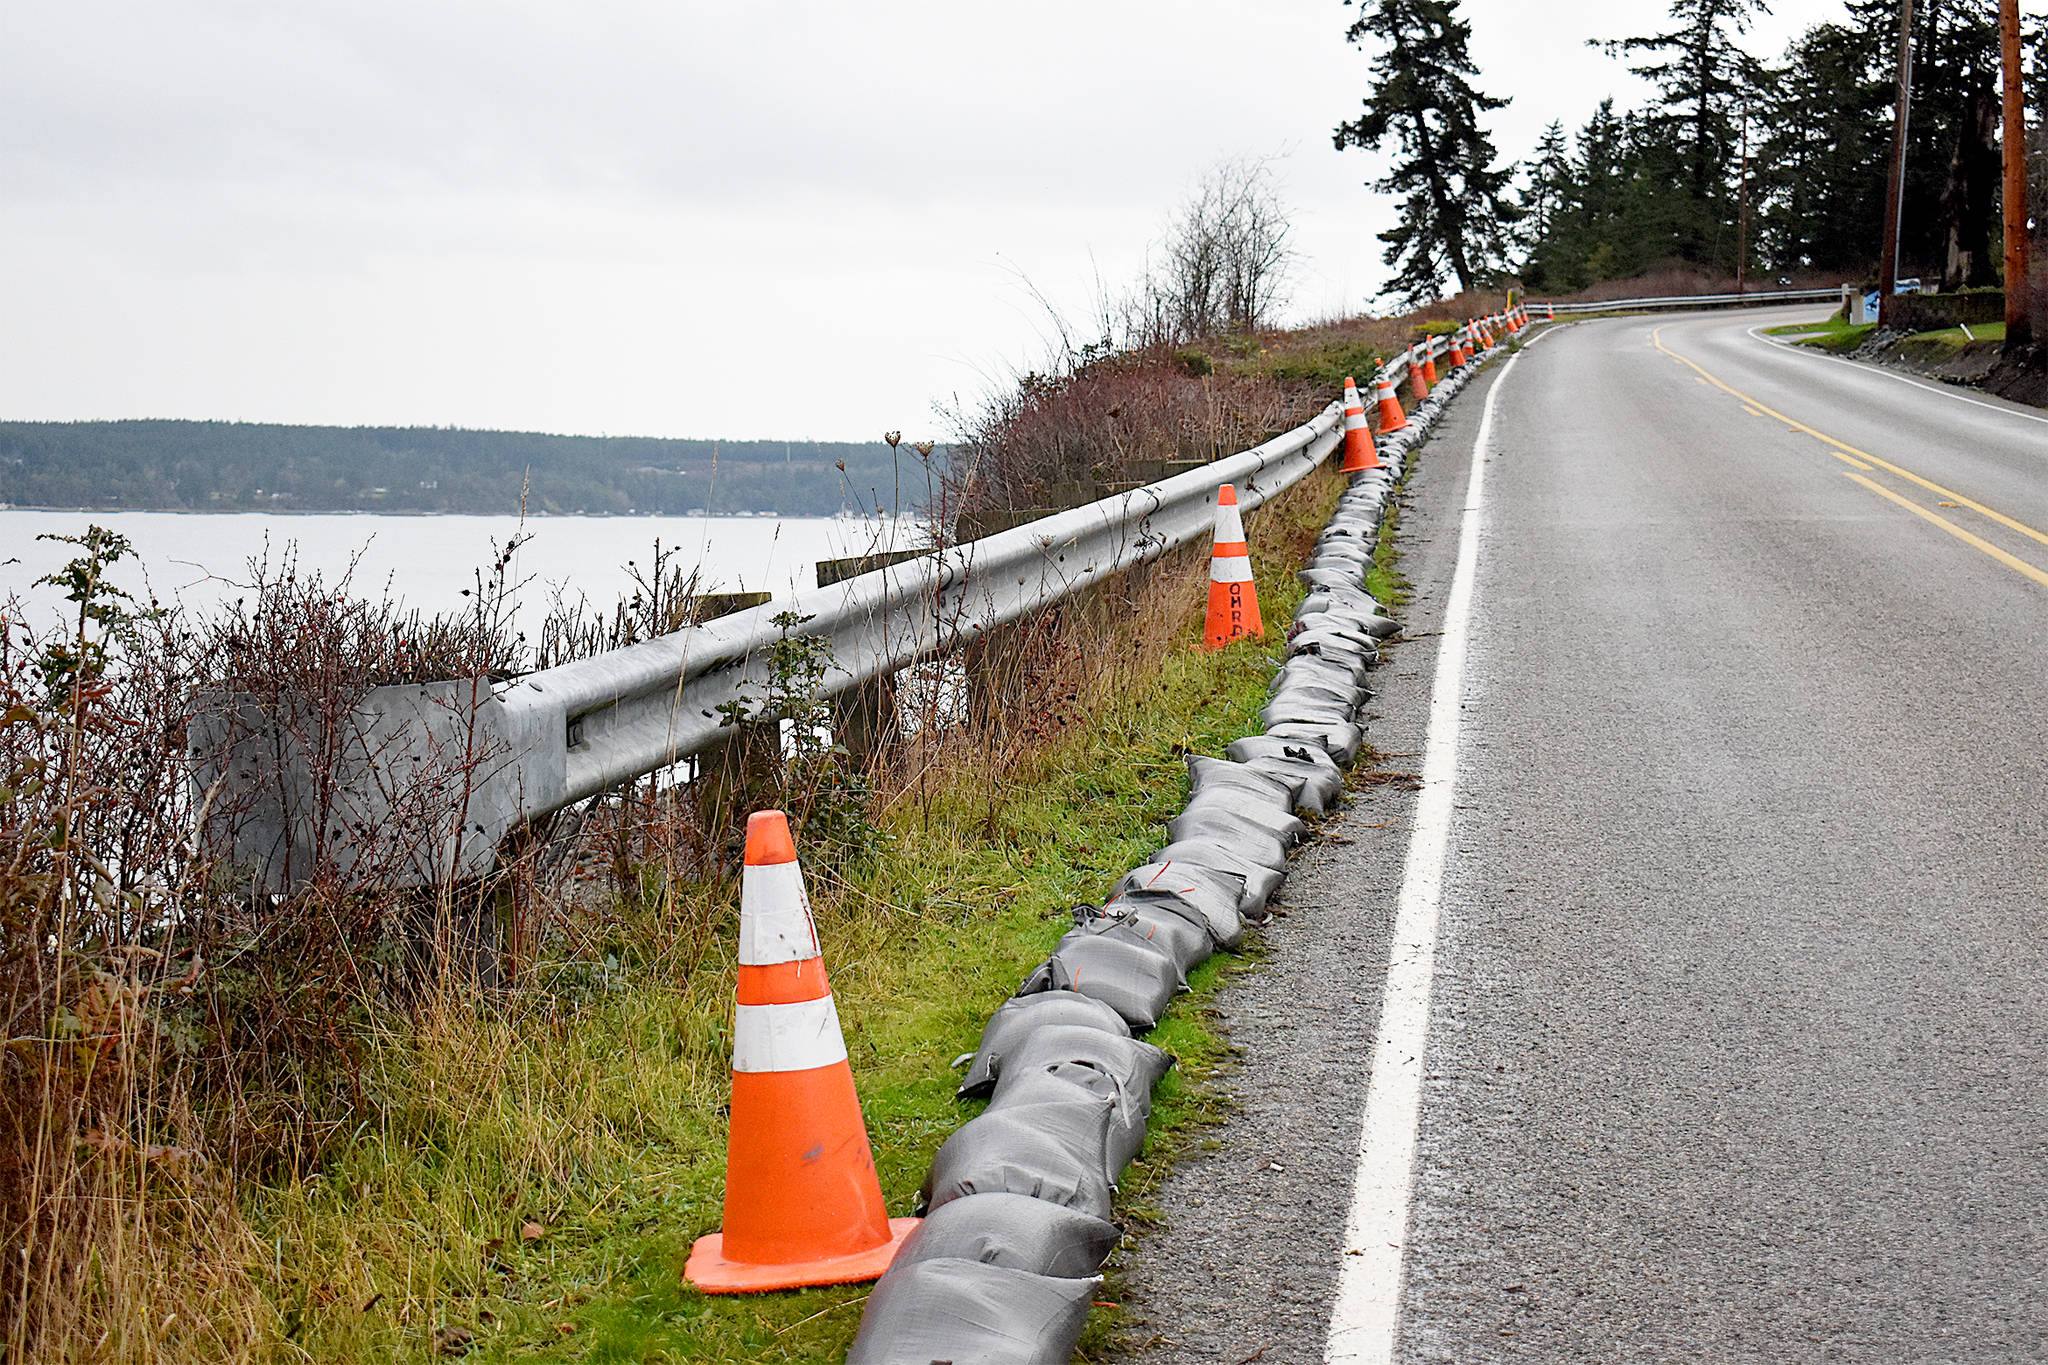 Island County has plans to realign Penn Cove Road after a section was impacted by a small landslide last month a quarter mile west of the Monroe Landing boat launch. Photo by Emily Gilbert/Whidbey News-Times